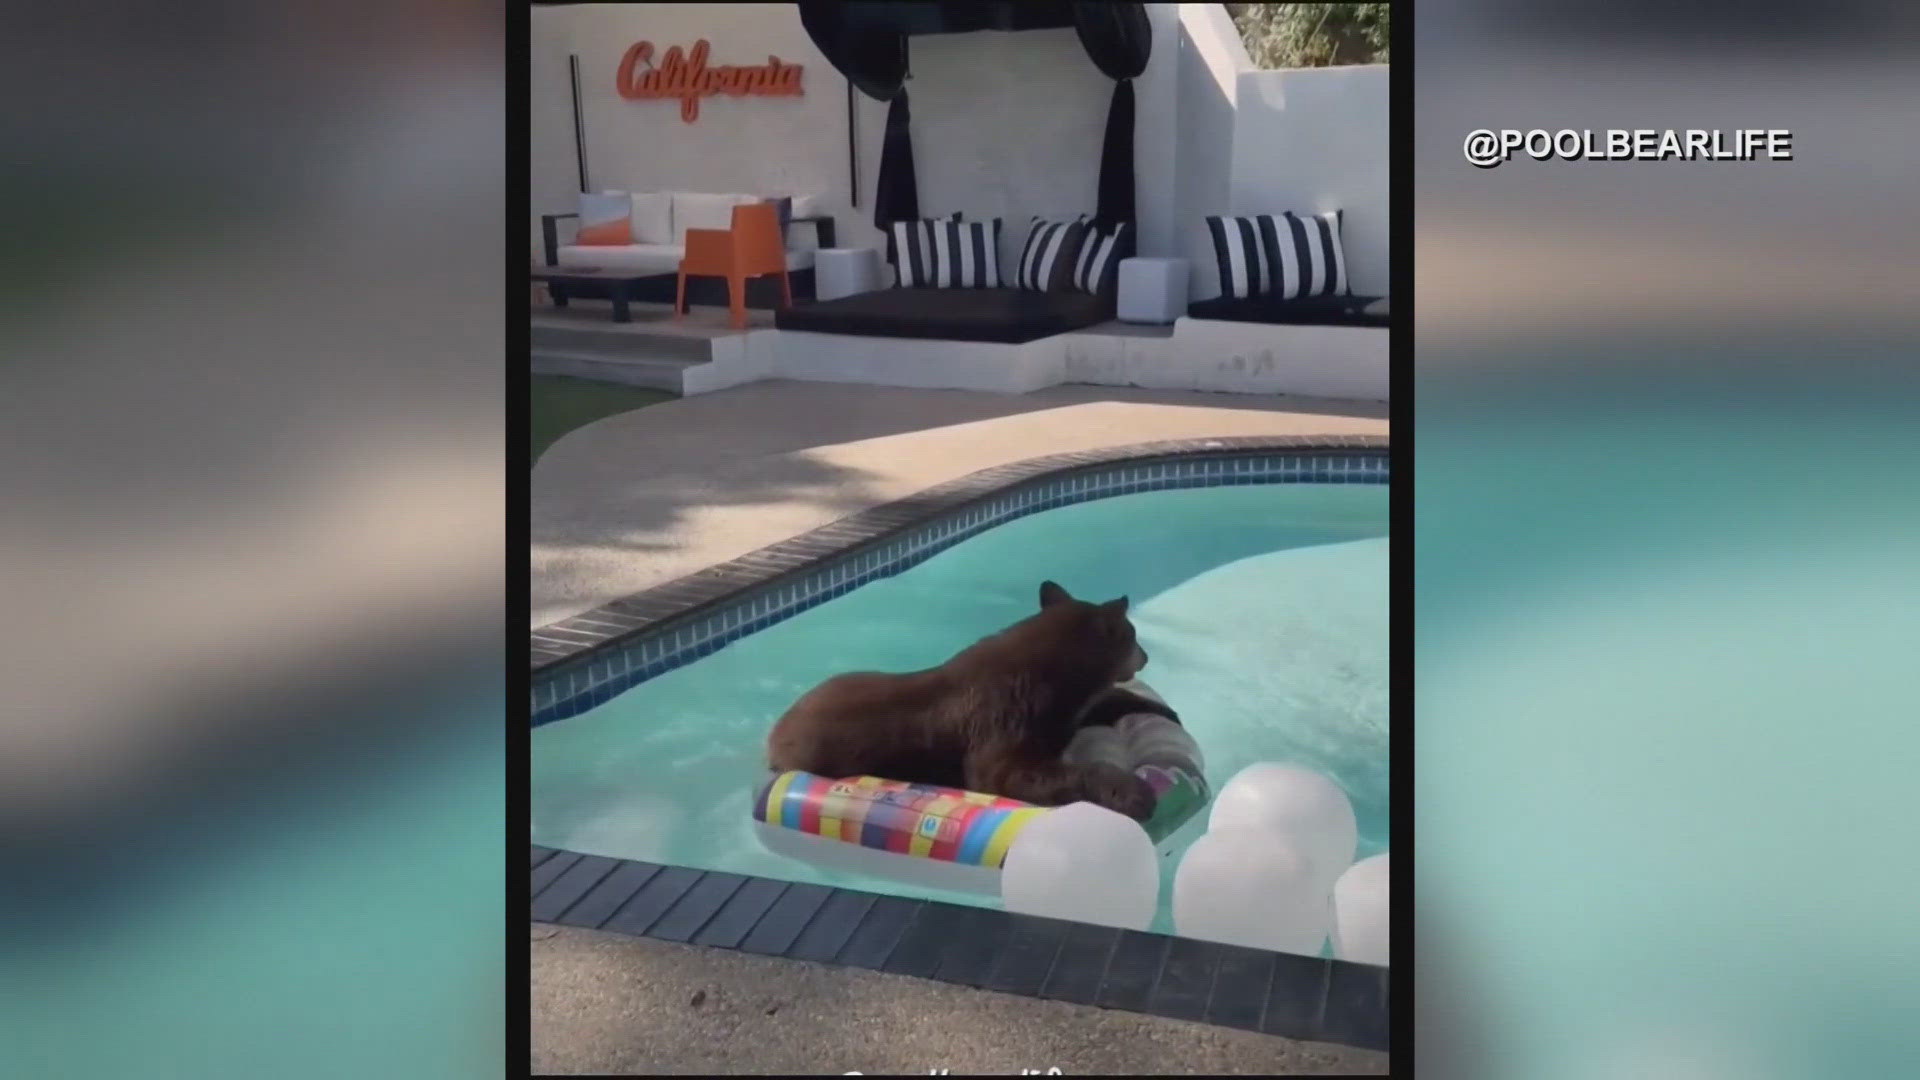 A California family recorded a video of a bear having fun with their pool floaties!